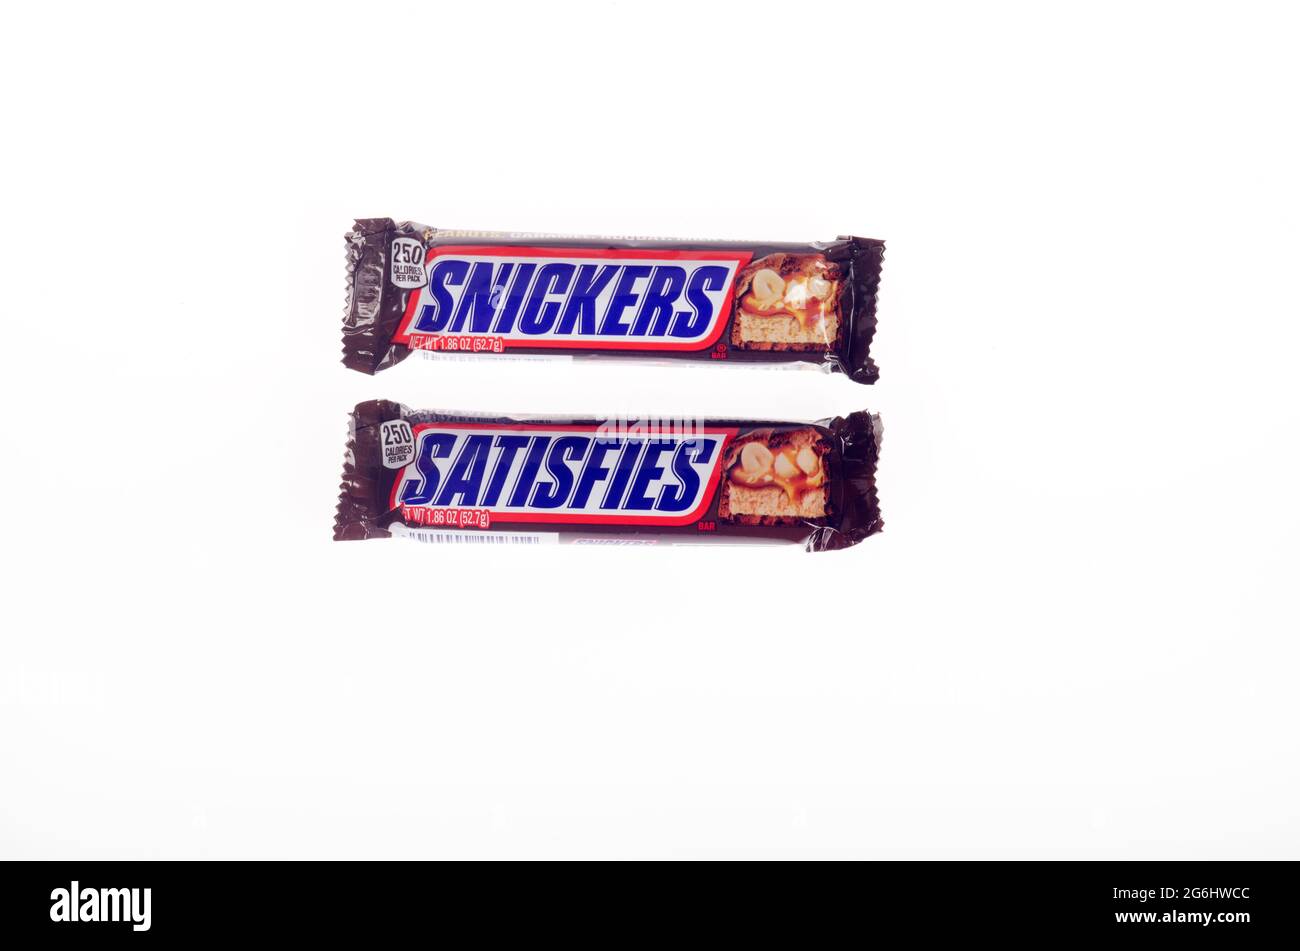 Snickers Befriedigt Candy Bars Stockfoto